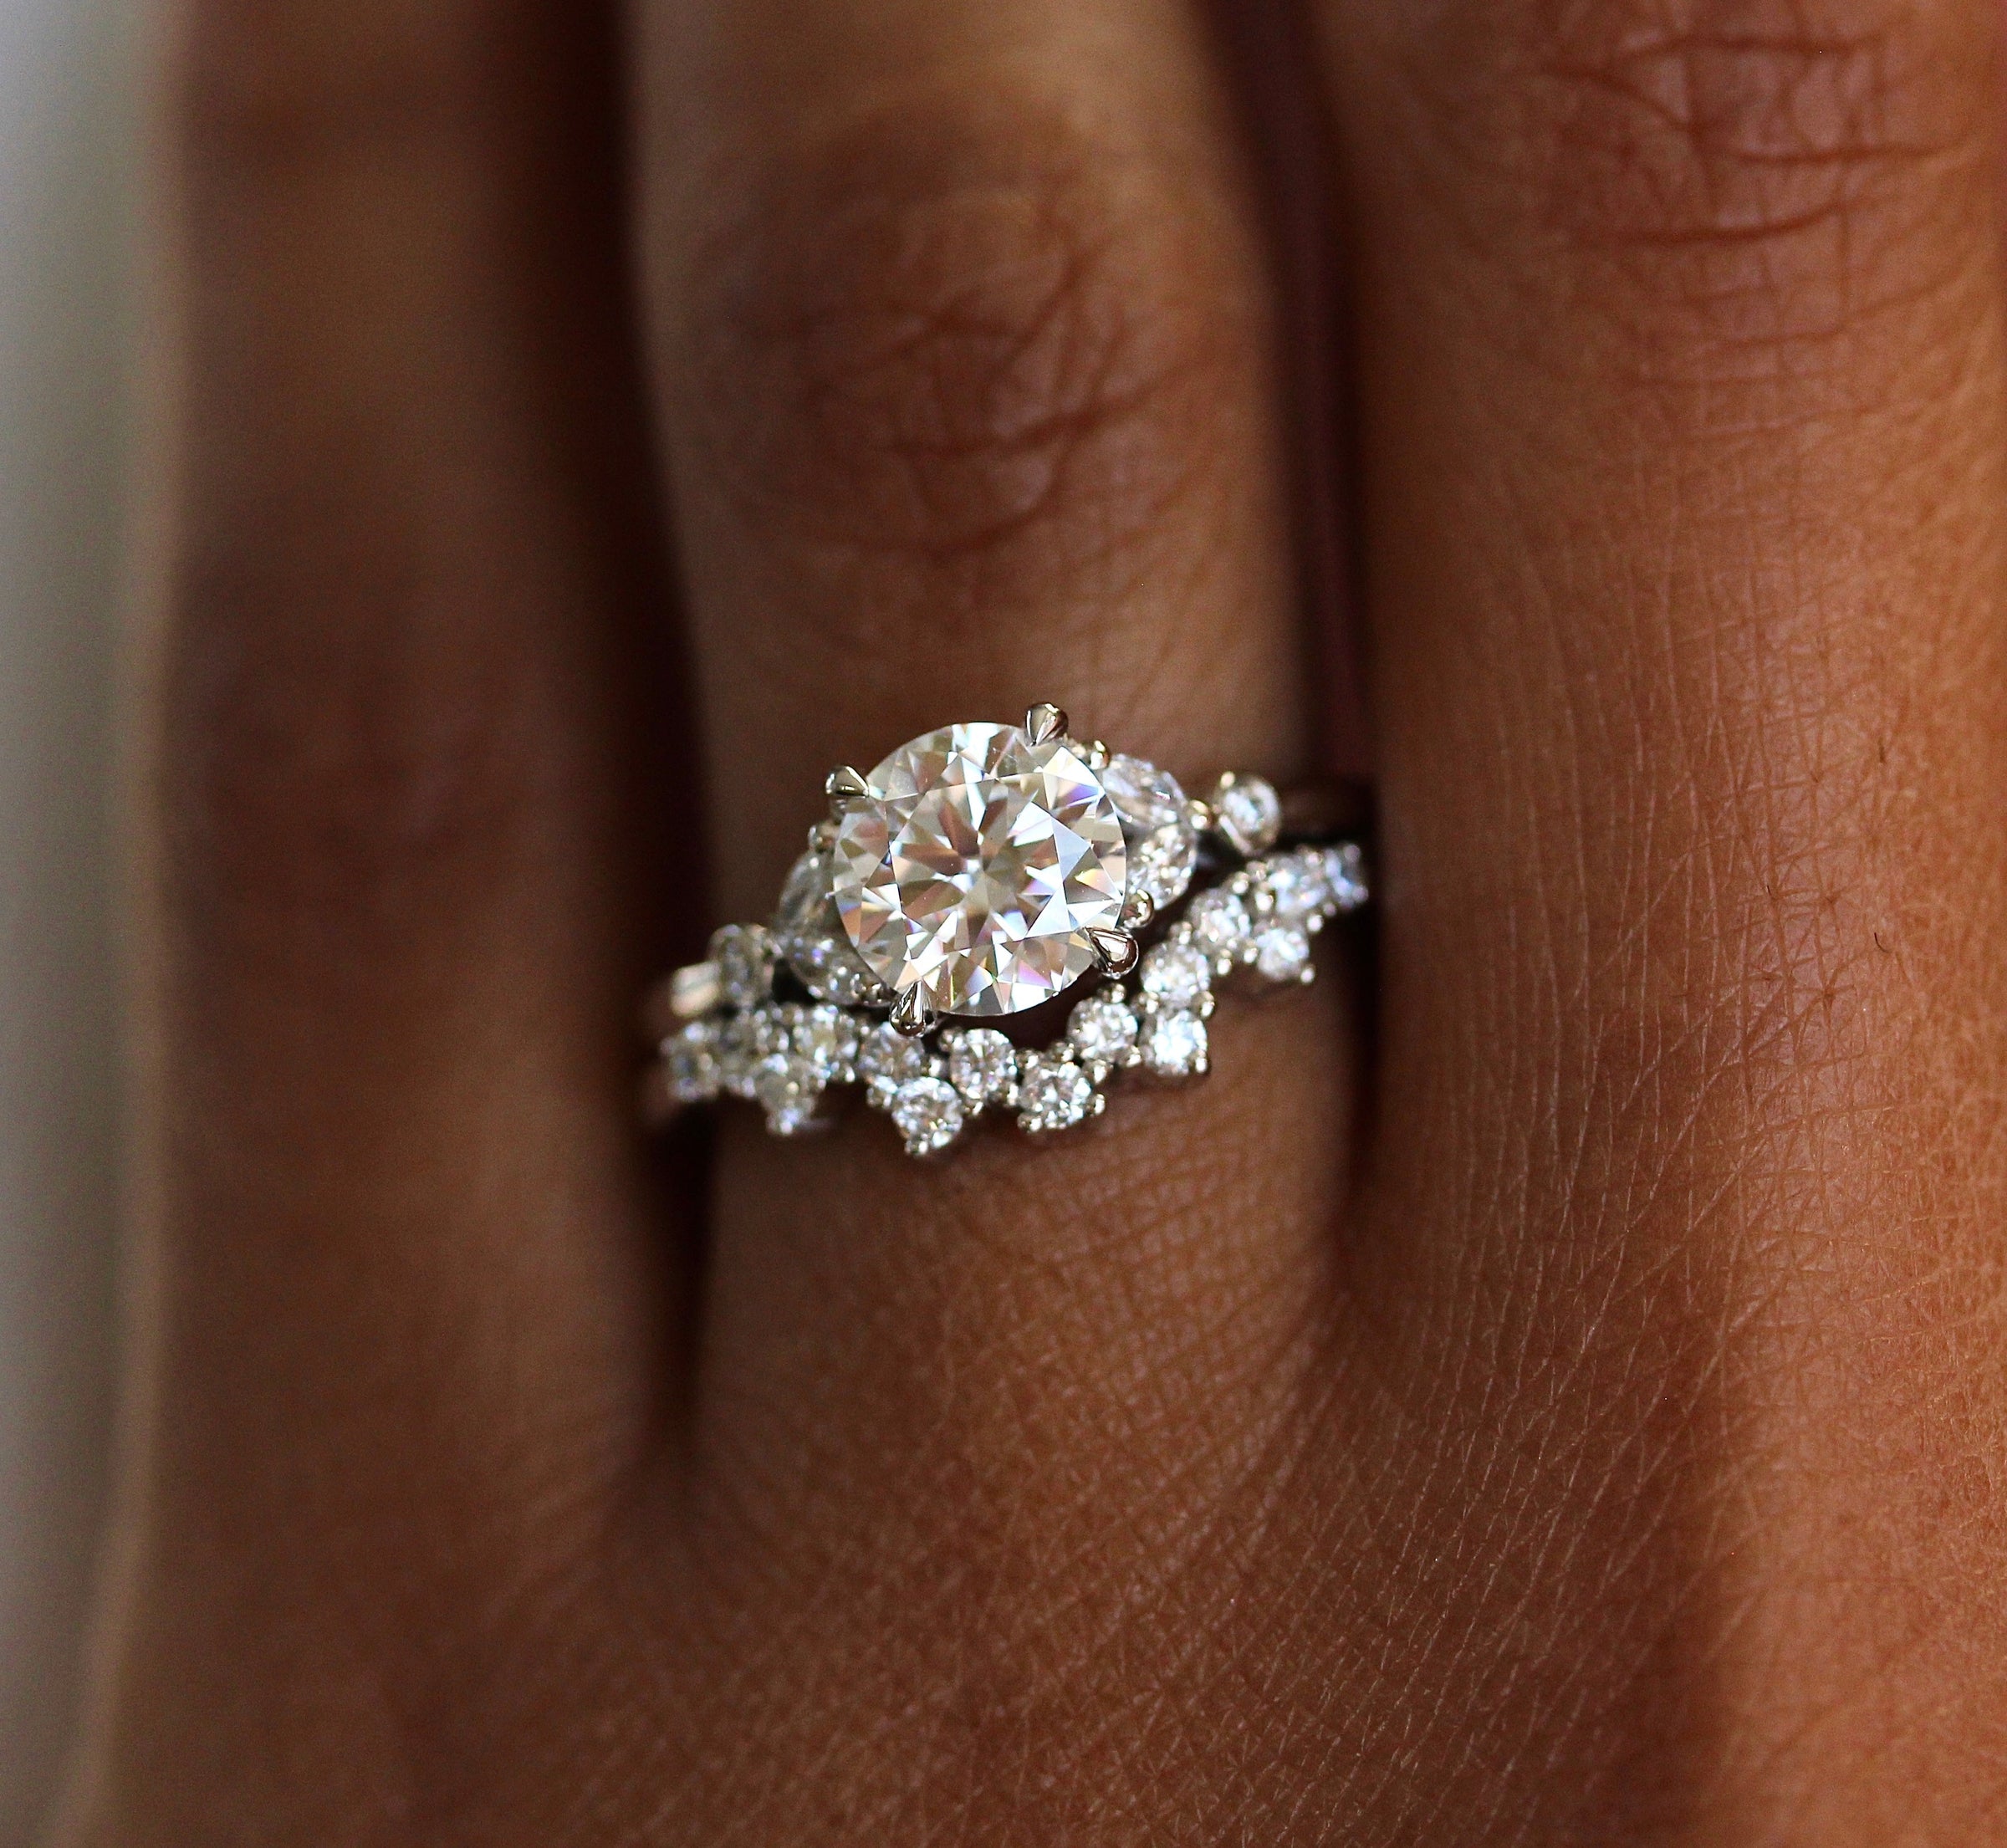 Engagement Rings Under $3,000